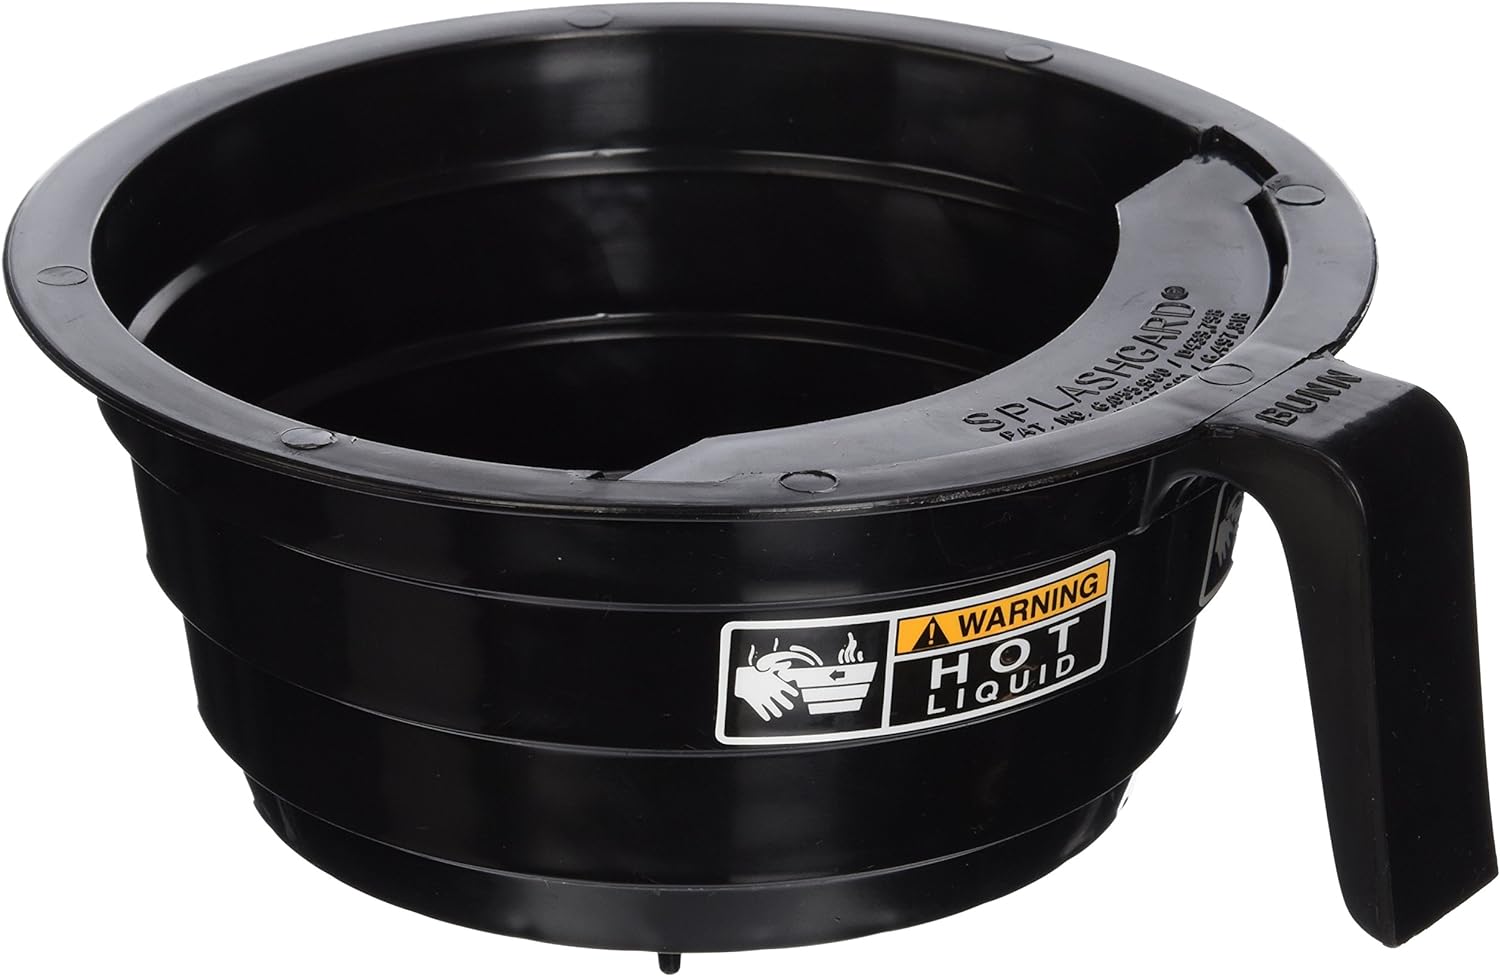 Bunn 20583.0003 Black Plastic Funnel with Decals